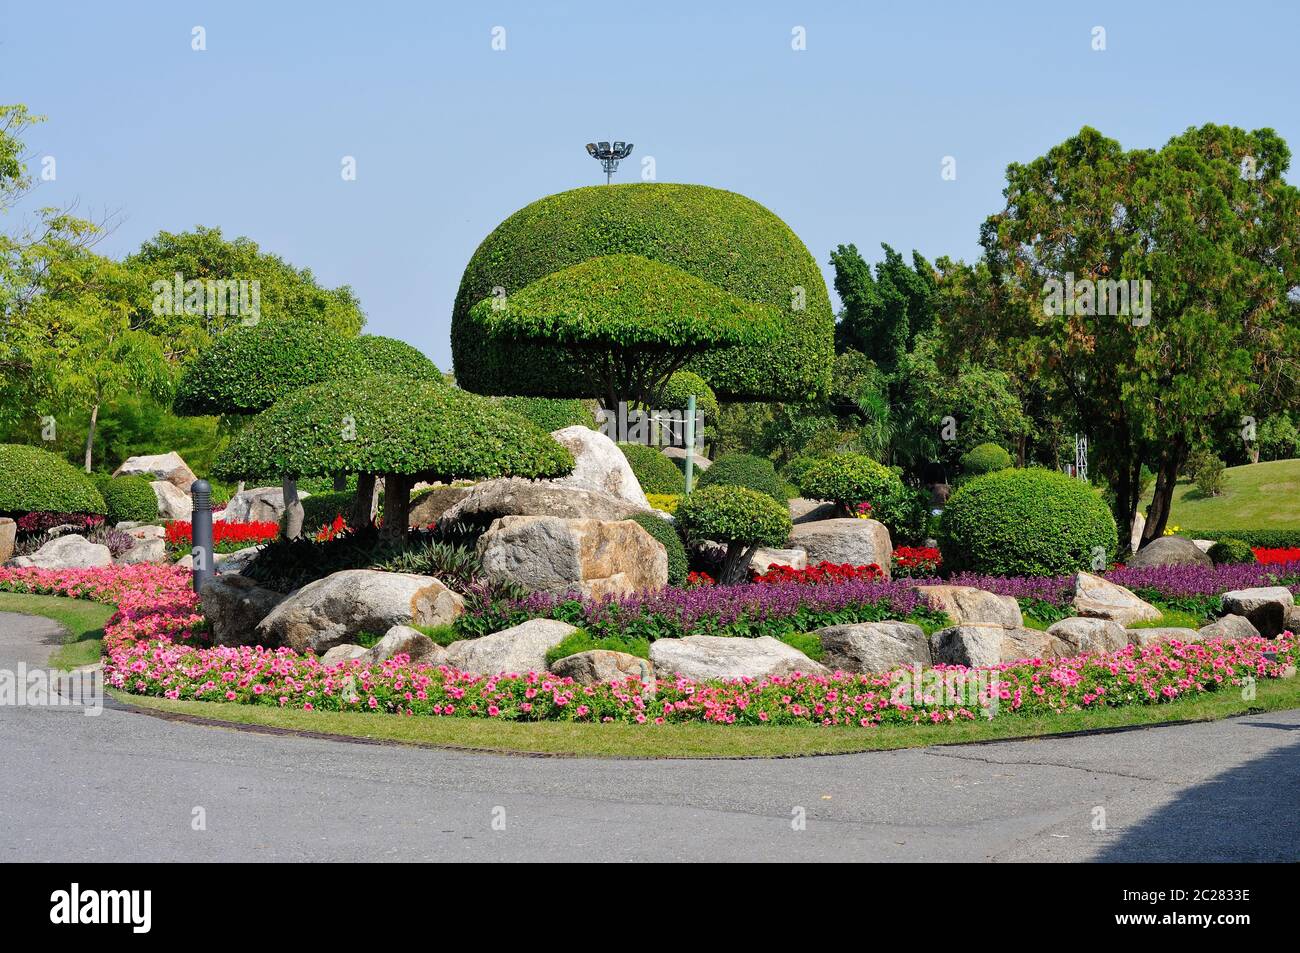 A Very Well maintained Park with Lovely Plants and Flowers Stock Photo